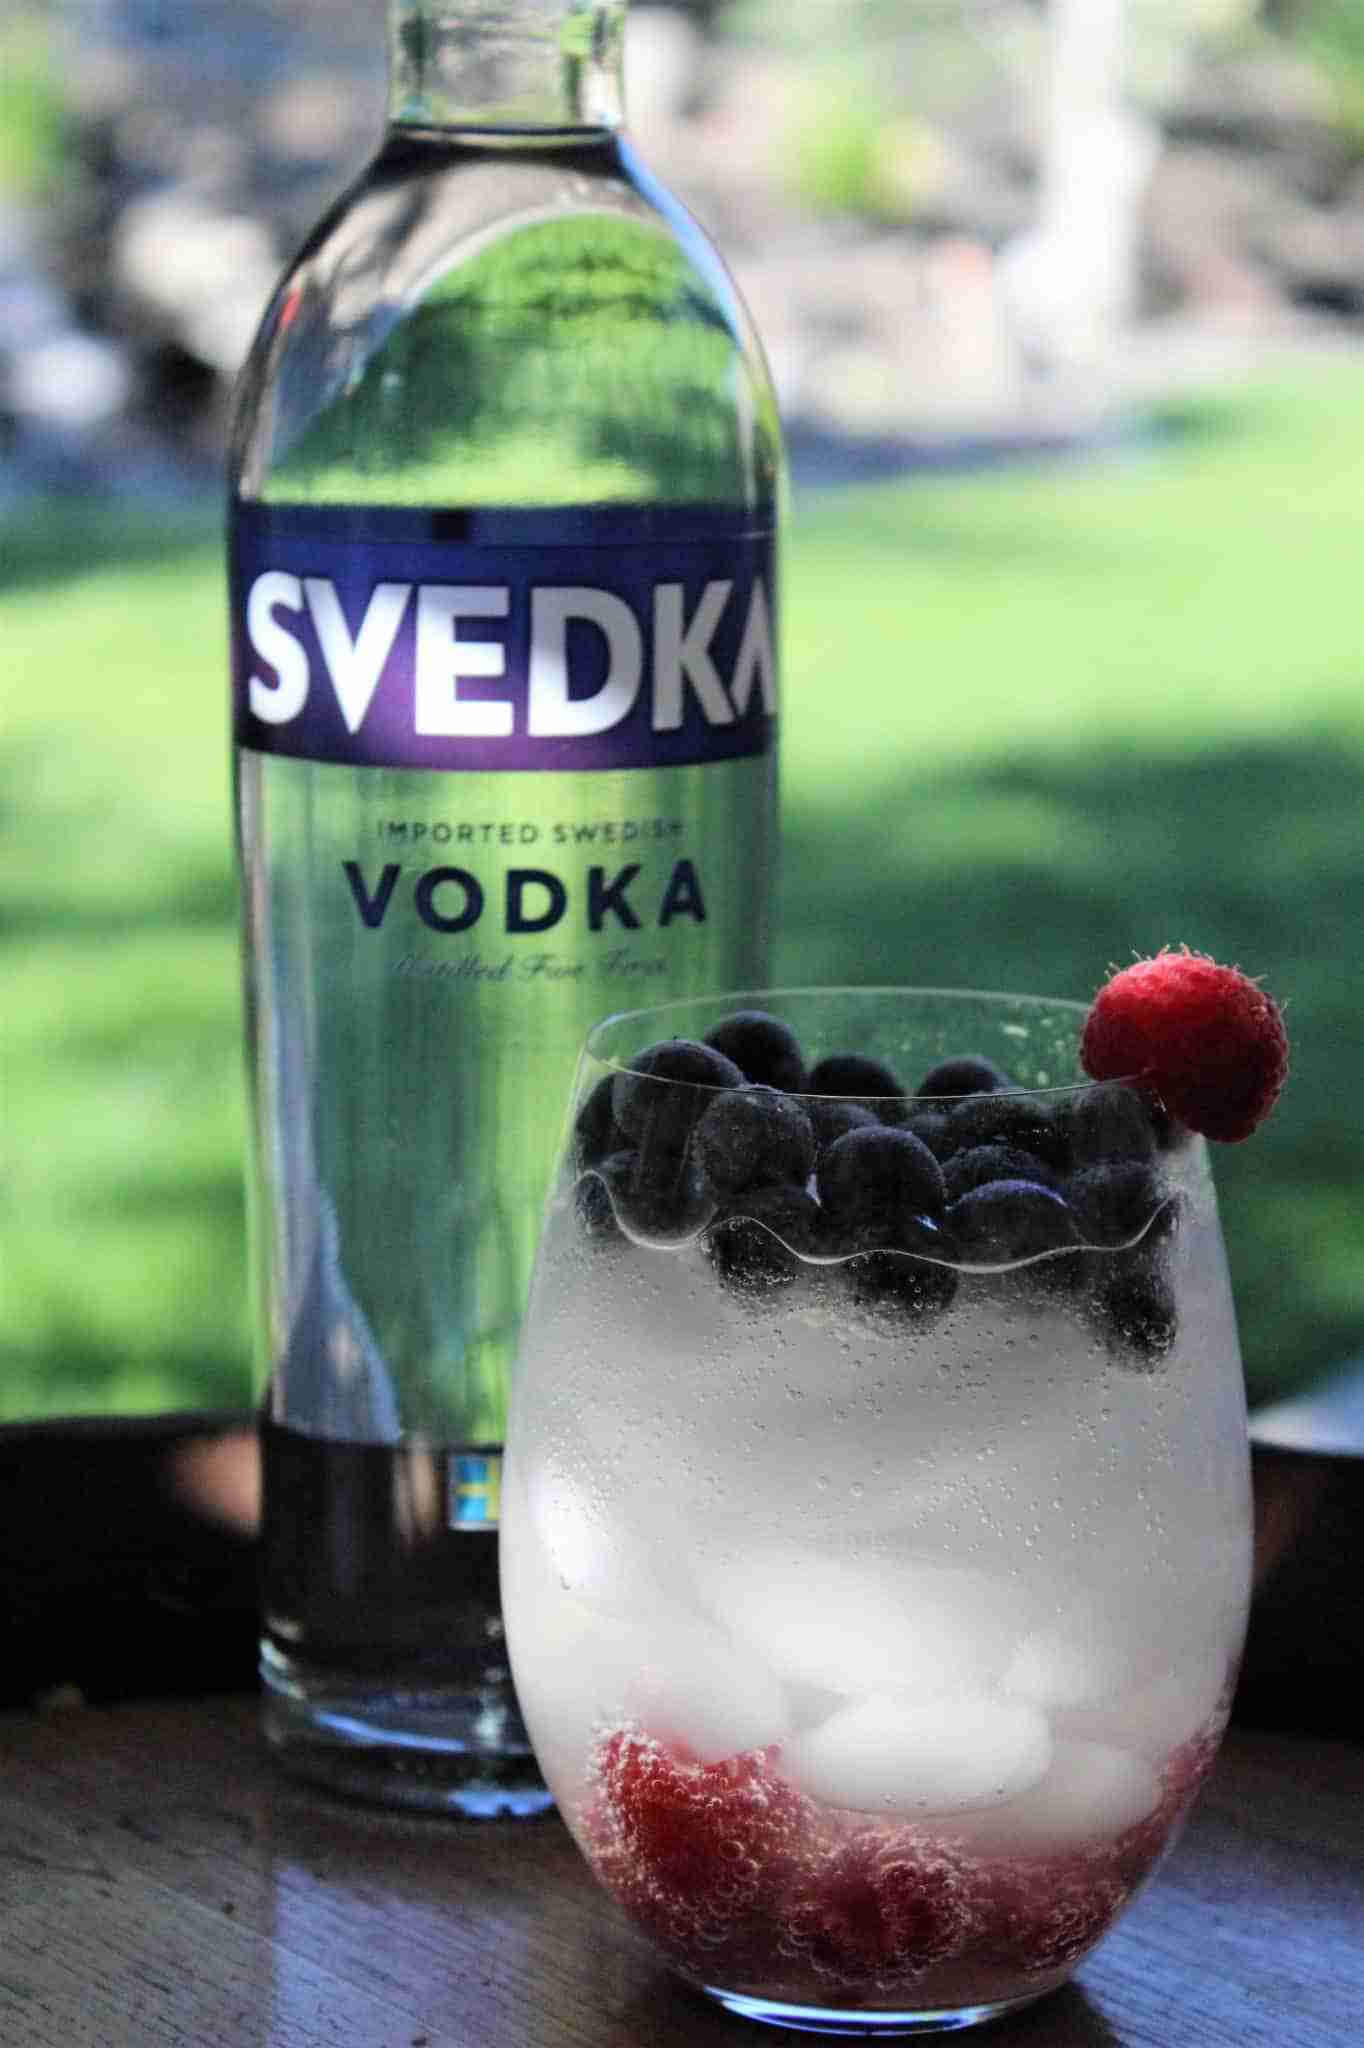 Sparkling Red, White & Blue Cocktail